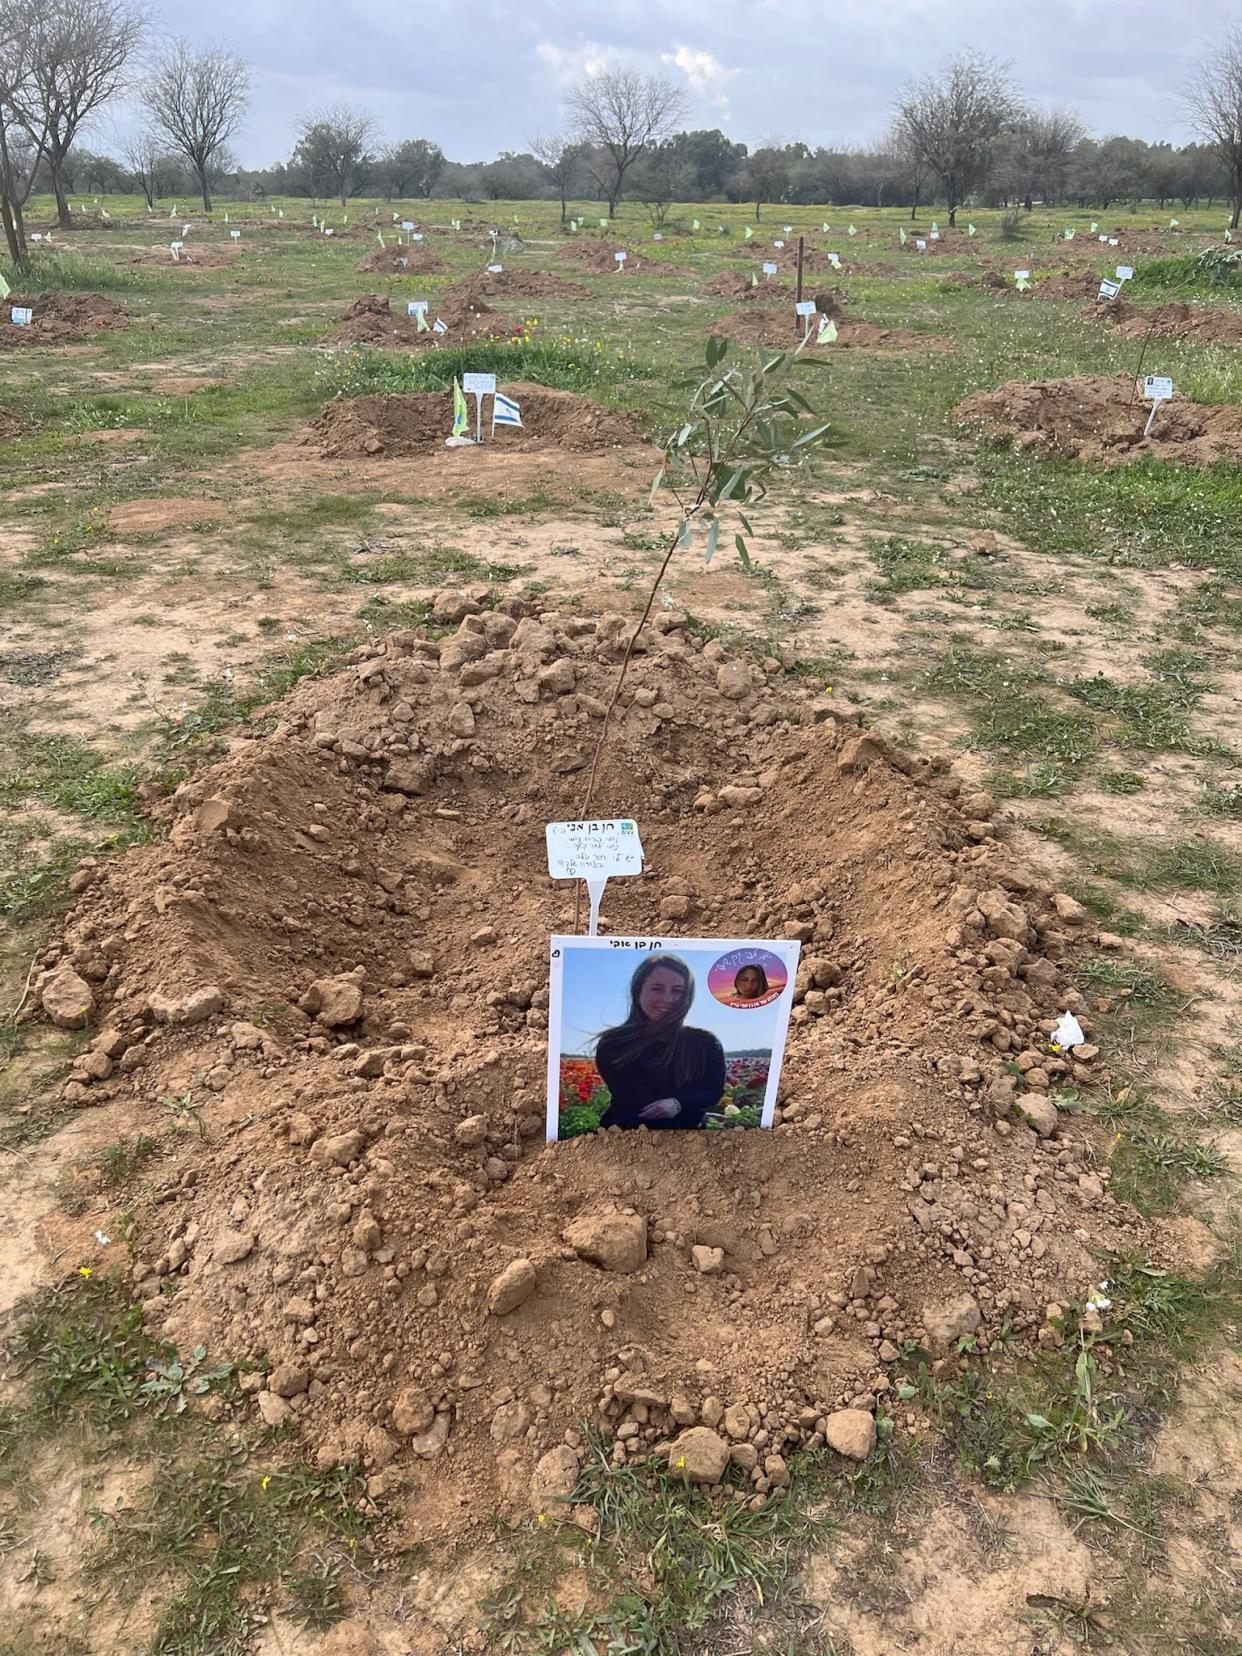 Four rabbis from metro Detroit visited the site of the Nova Music Festival in Israel. Pictured is a memorial at the site set up with a tree planted for each of the people at the festival who died on October 7th, when Hamas attacked. Pictured is a tree planted in memory of Chen Ben-Avi, one of the victims, and a photo of her.